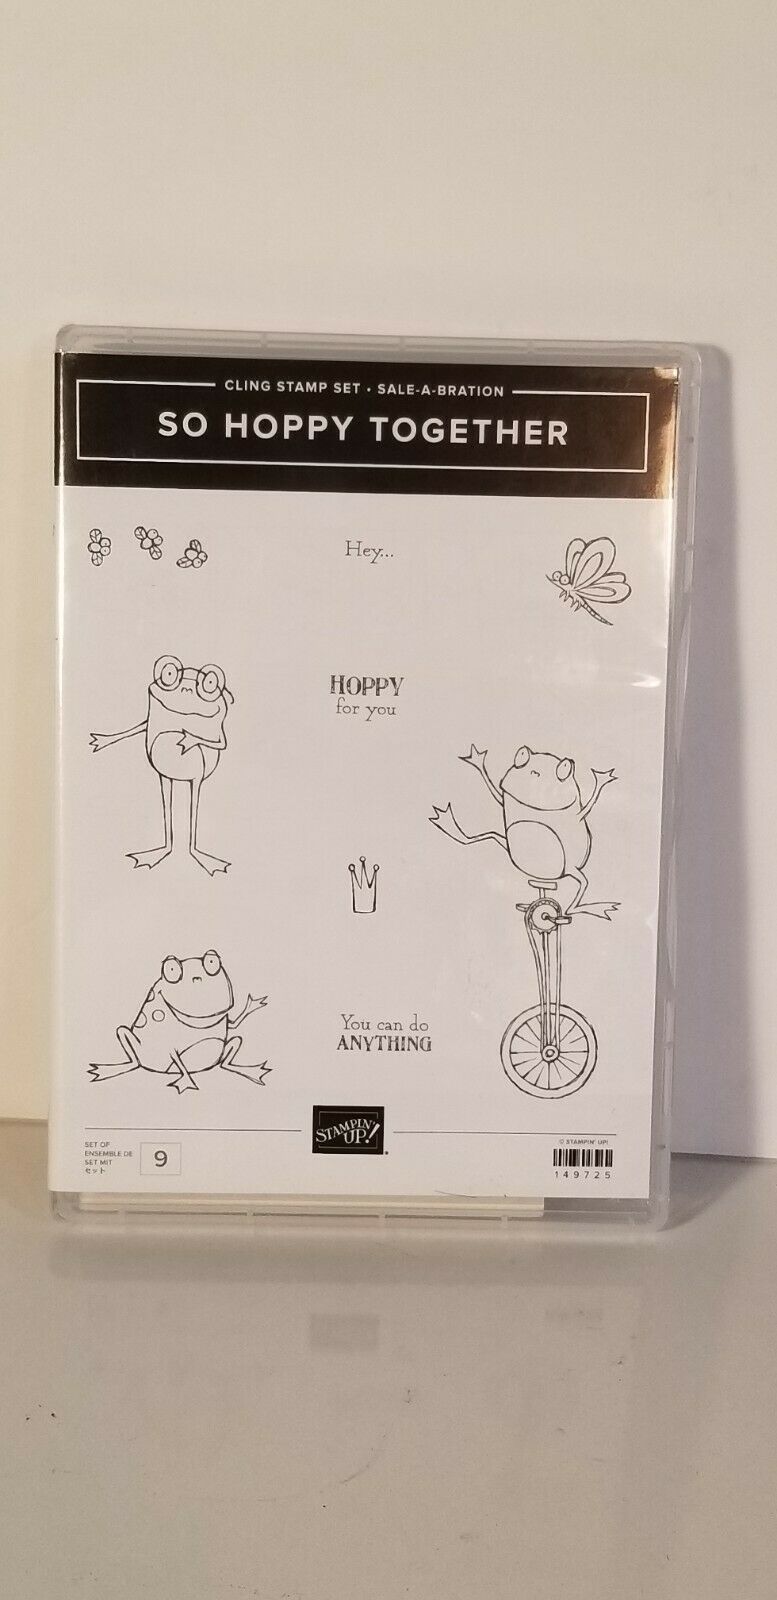 Primary image for STAMPIN' UP SO HOPPY TOGETHER Cling STAMP SET - Sale-A-Bration